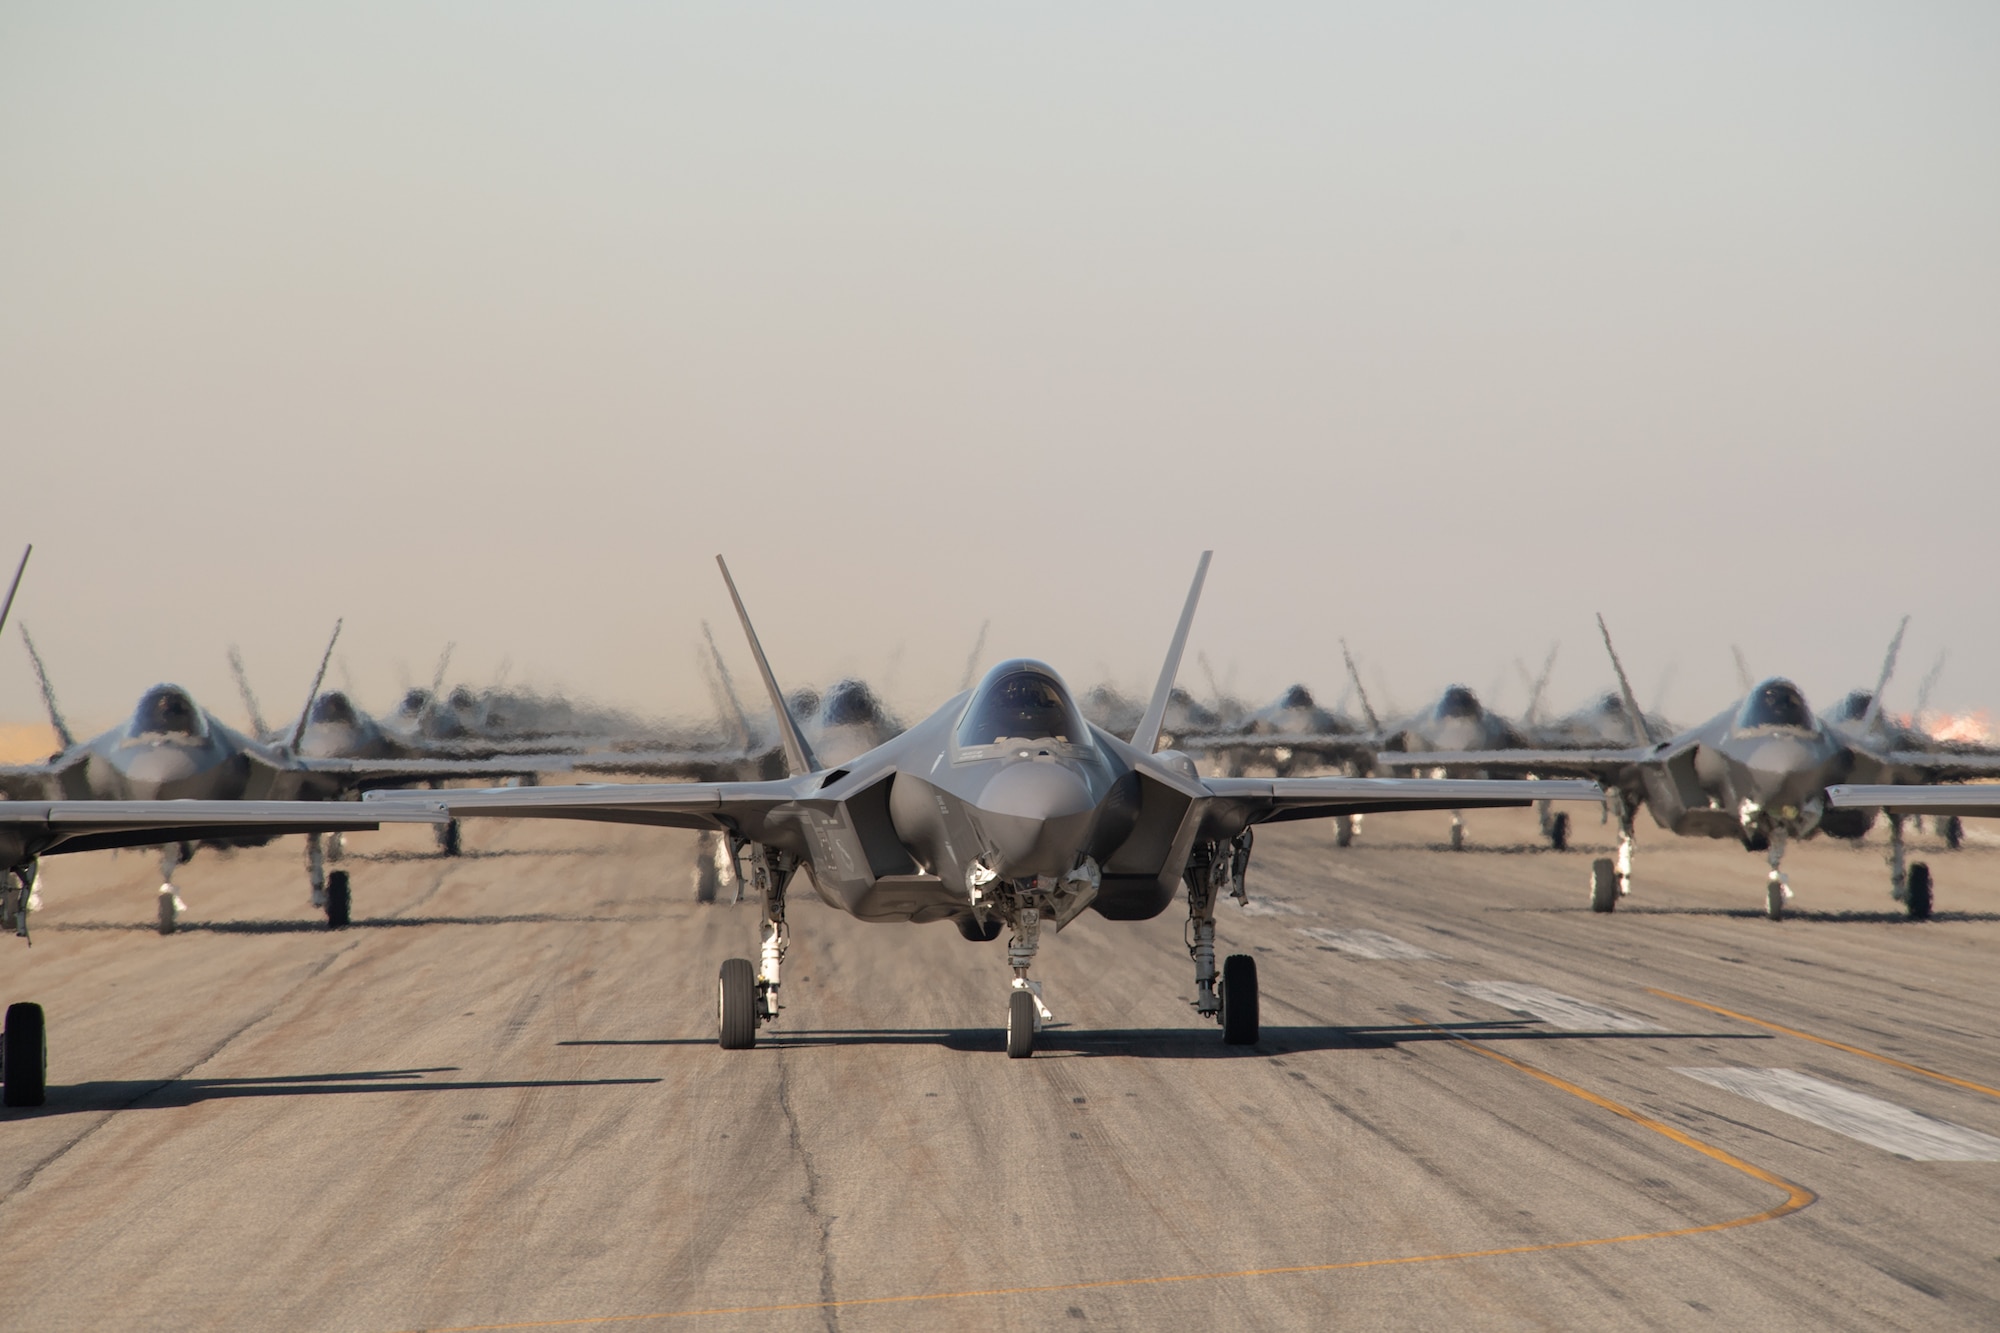 F-35A pilots from the 388th and 419th Fighter Wing prepare for takeoff as part of a combat power exercise at Hill Air Force Base, Utah. The exercise aims to confirm their ability to quickly employ a large force of jets against air and ground targets, and demonstrate the readiness and lethality of the F-35 Lightning II. As the first combat-ready F-35 units in the Air Force, the 388th and 419th FWs are ready to deploy anywhere in the world at a moment’s notice. (United States Air Force photo/Cynthia Griggs)